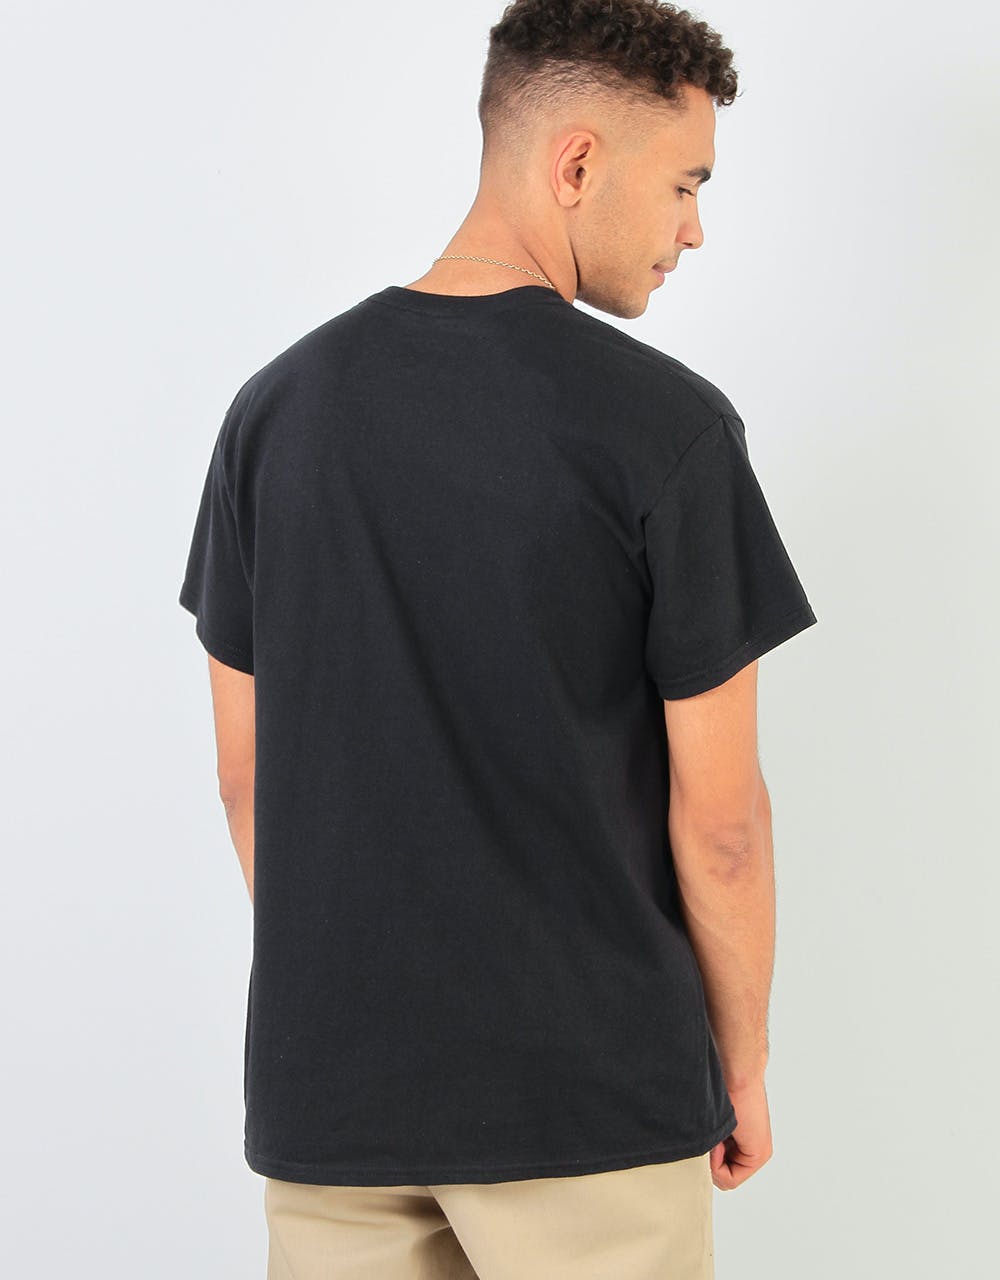 Route One Throwback T-Shirt - Black